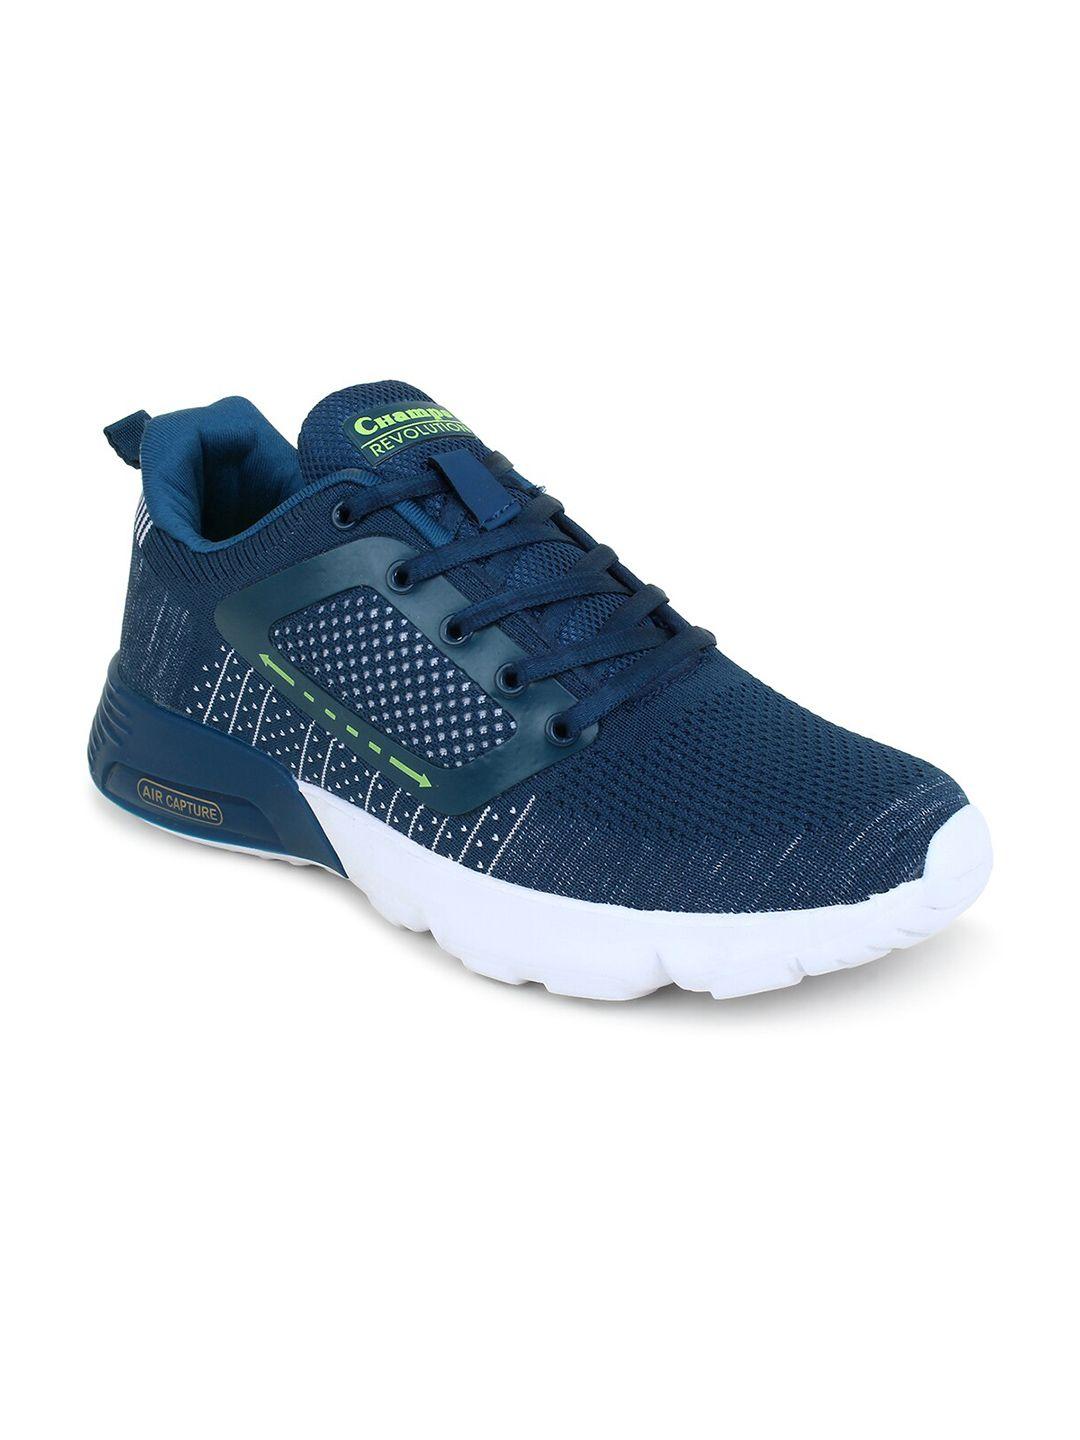 champs-men-air-plus-technology-non-marking-running-sports-shoes